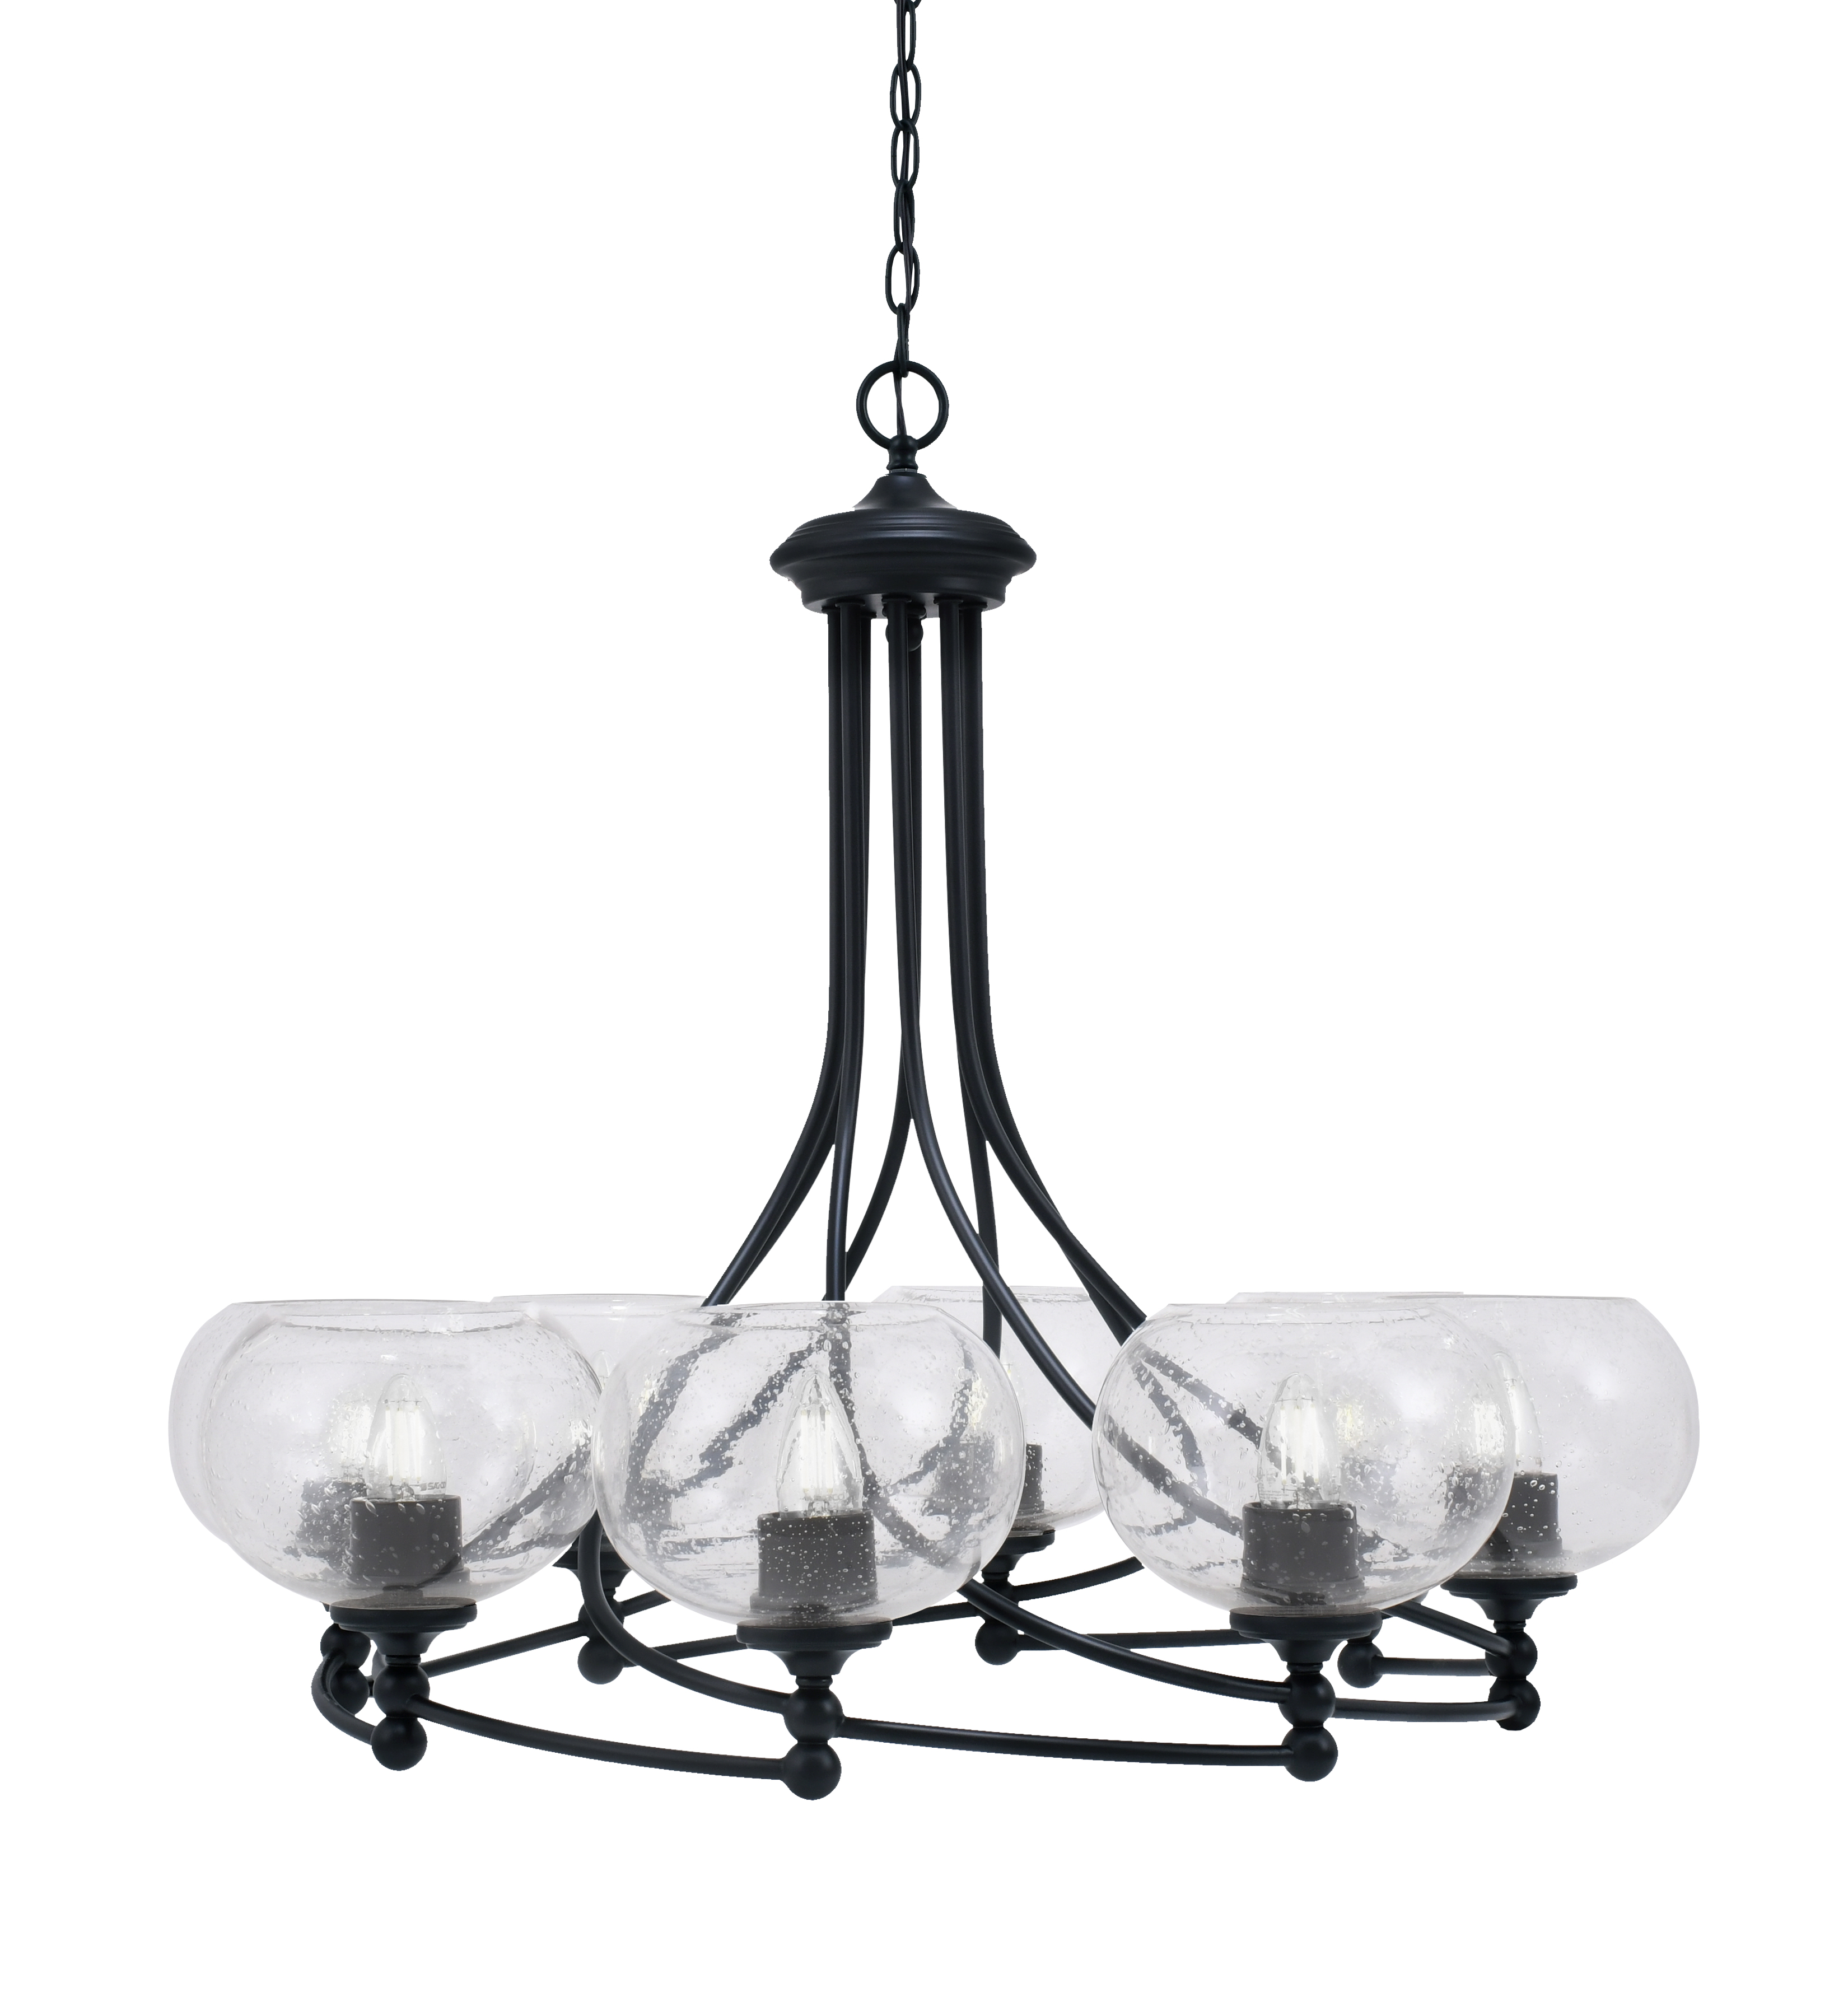 Toltec Lighting 908-MB-202 Capri Uplight, 8 Light, Chandelier Shown In Matte Black Finish With 7" Clear Bubble Glass